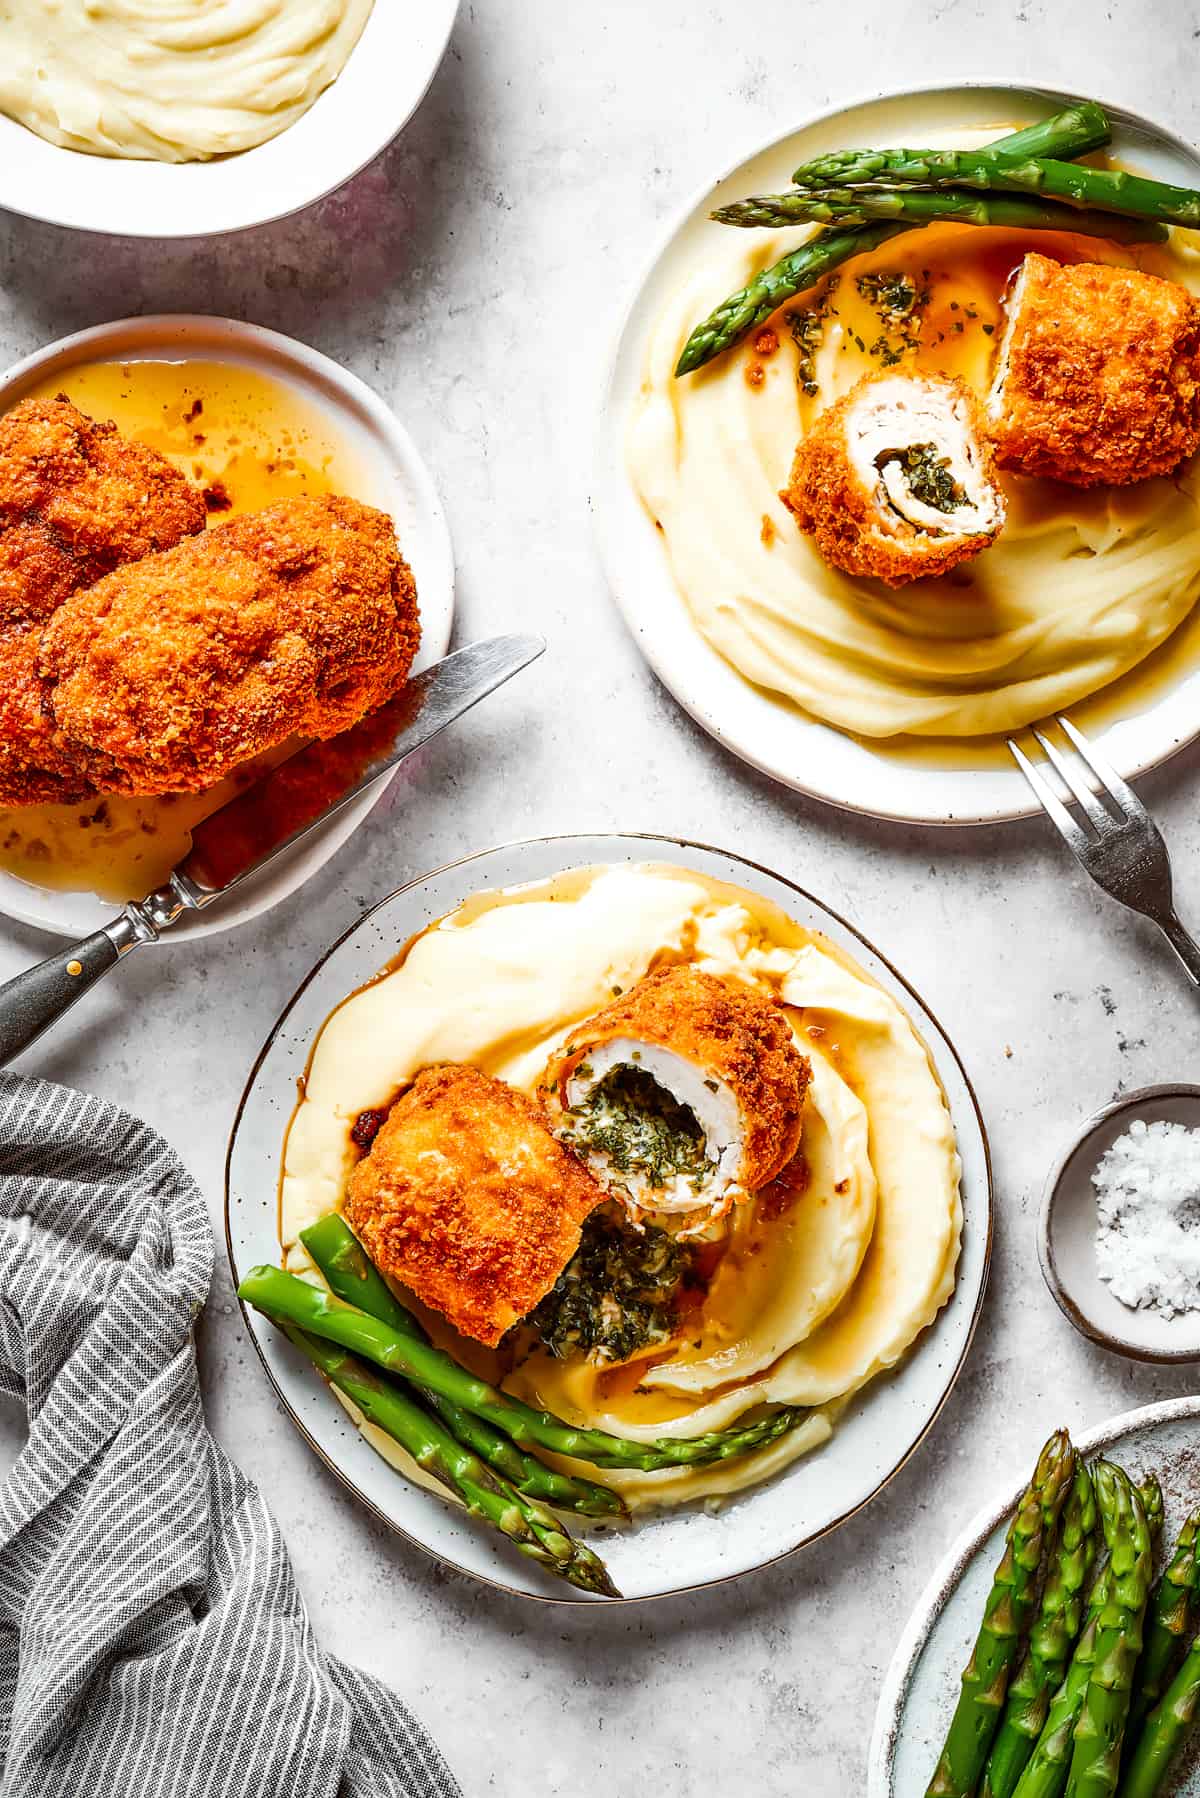 Chicken Kiev served on dinner plates with mashed potatoes and asparagus.